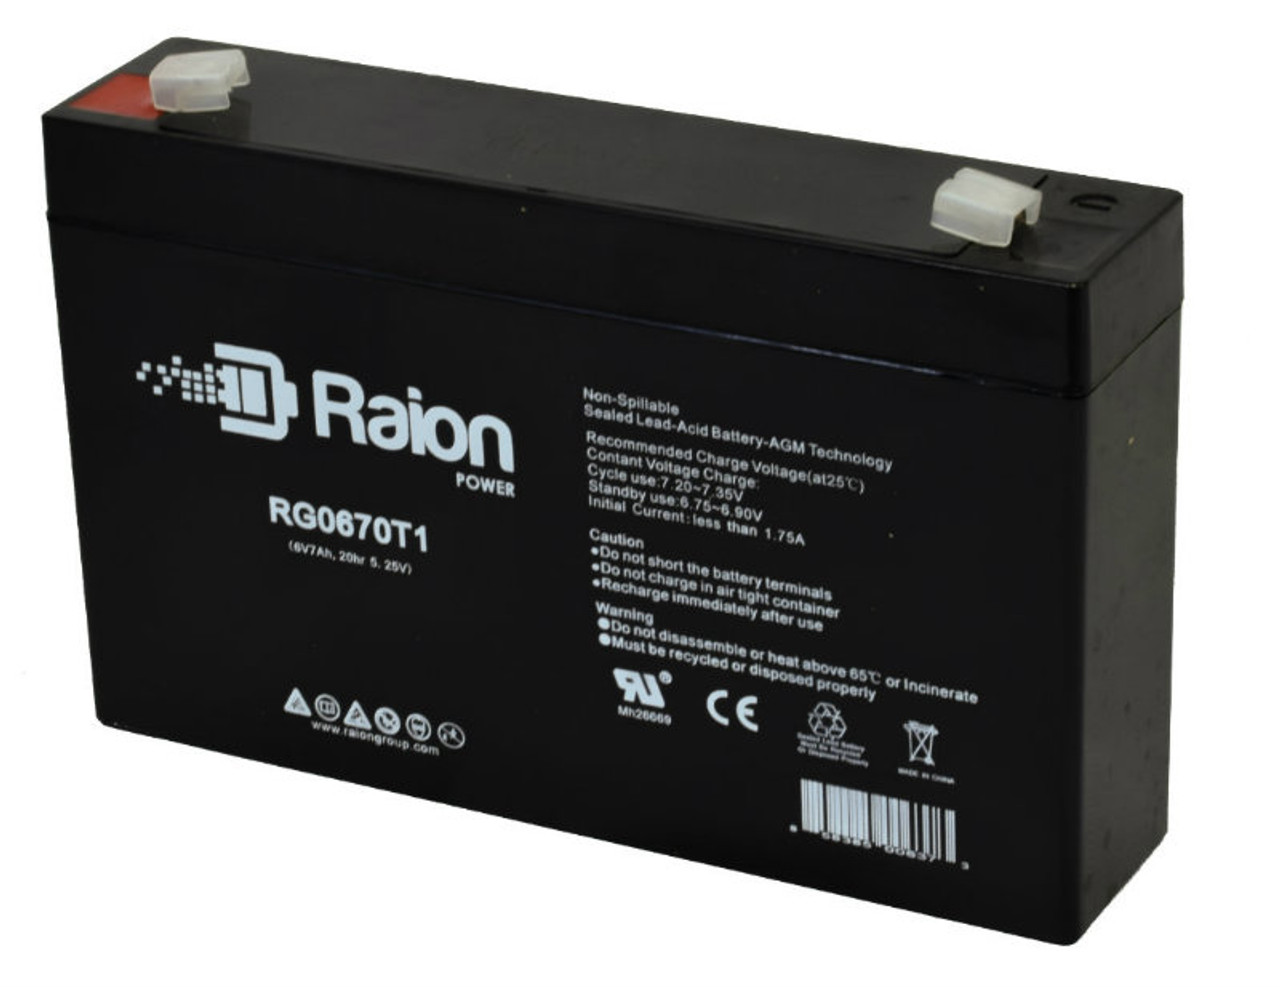 Raion Power RG0670T1 6V 7Ah Replacement Emergency Lighting Battery for Lithonia LLBE1